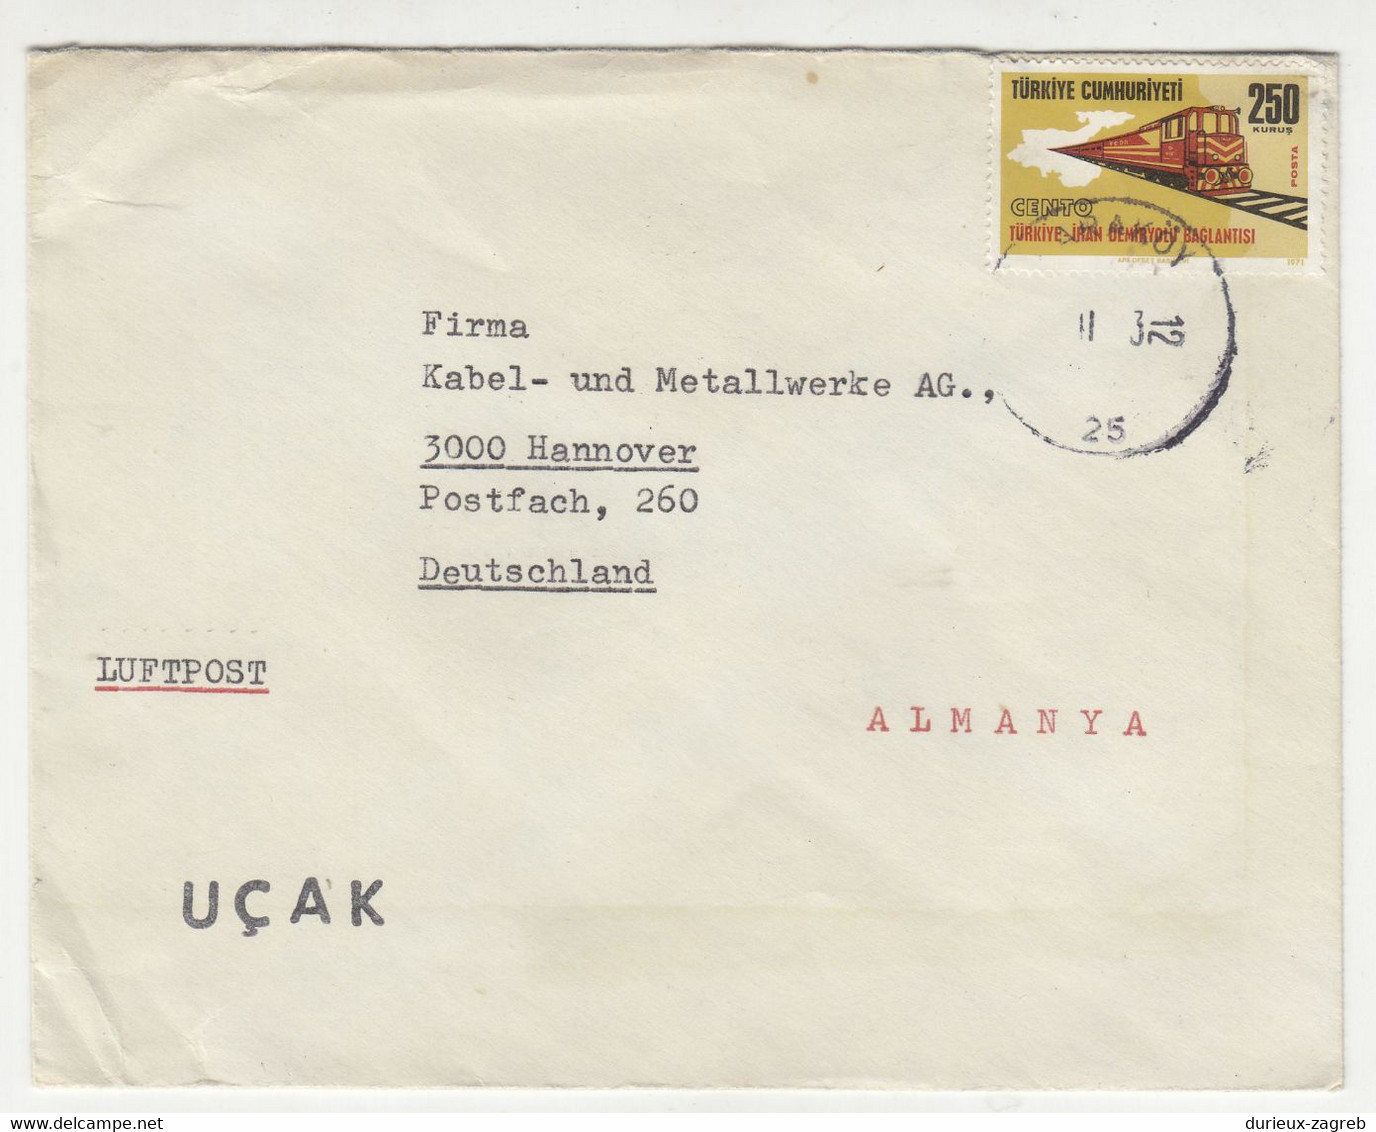 Turkey 5 Letter Covers Posted 1963-1986 To Austria/Germany B230301 - Covers & Documents